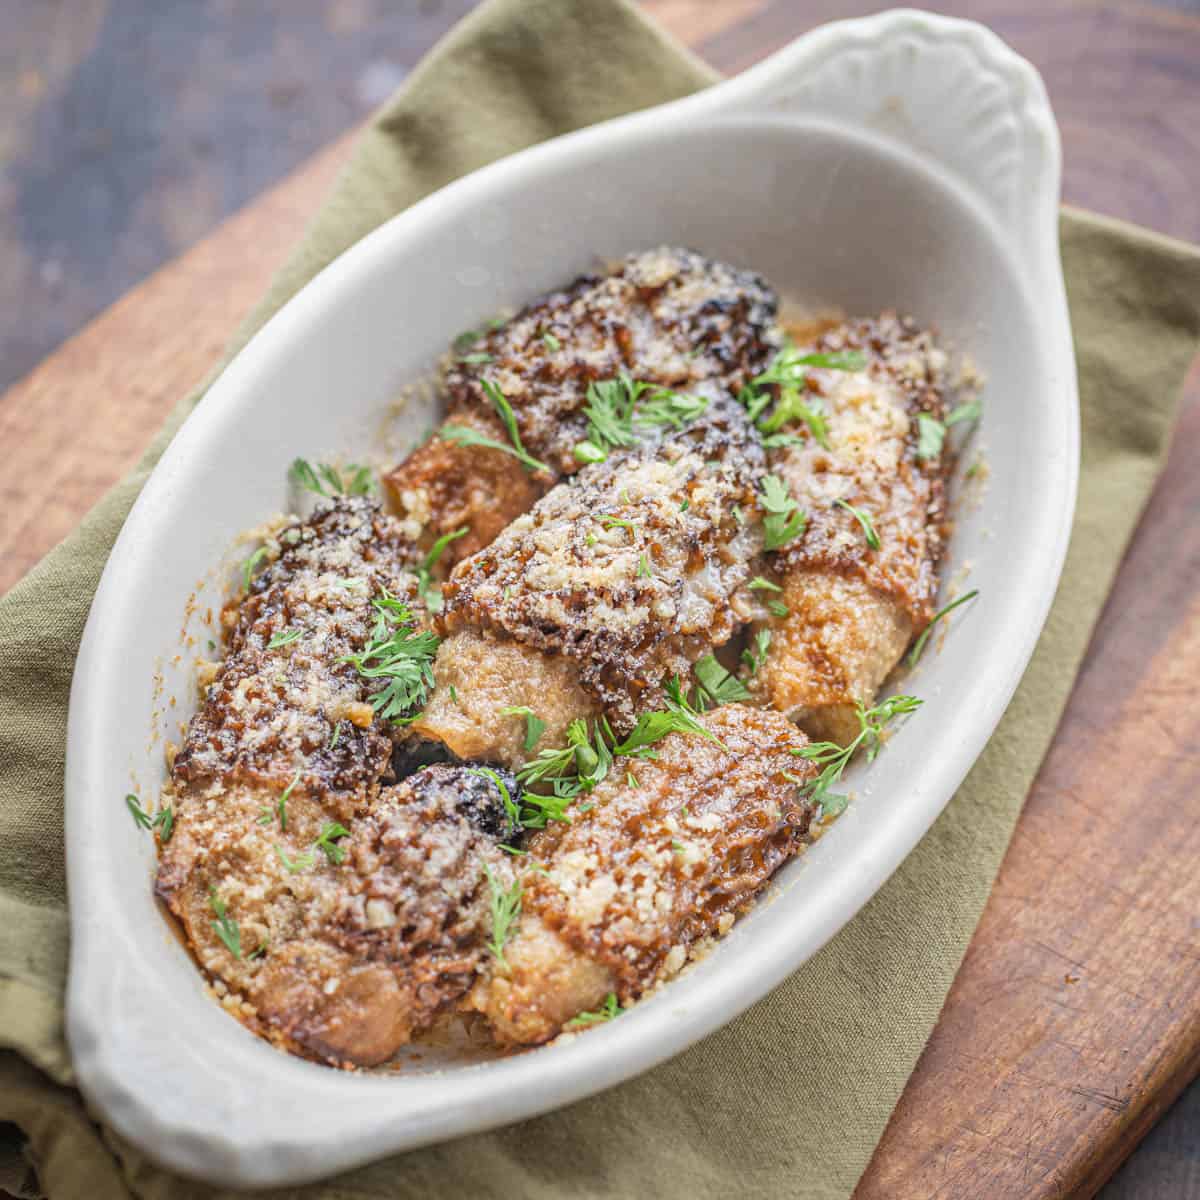 A welsh rarebit dish filled with baked stuffed morels topped with breadcrumbs and herbs on a napkin. 